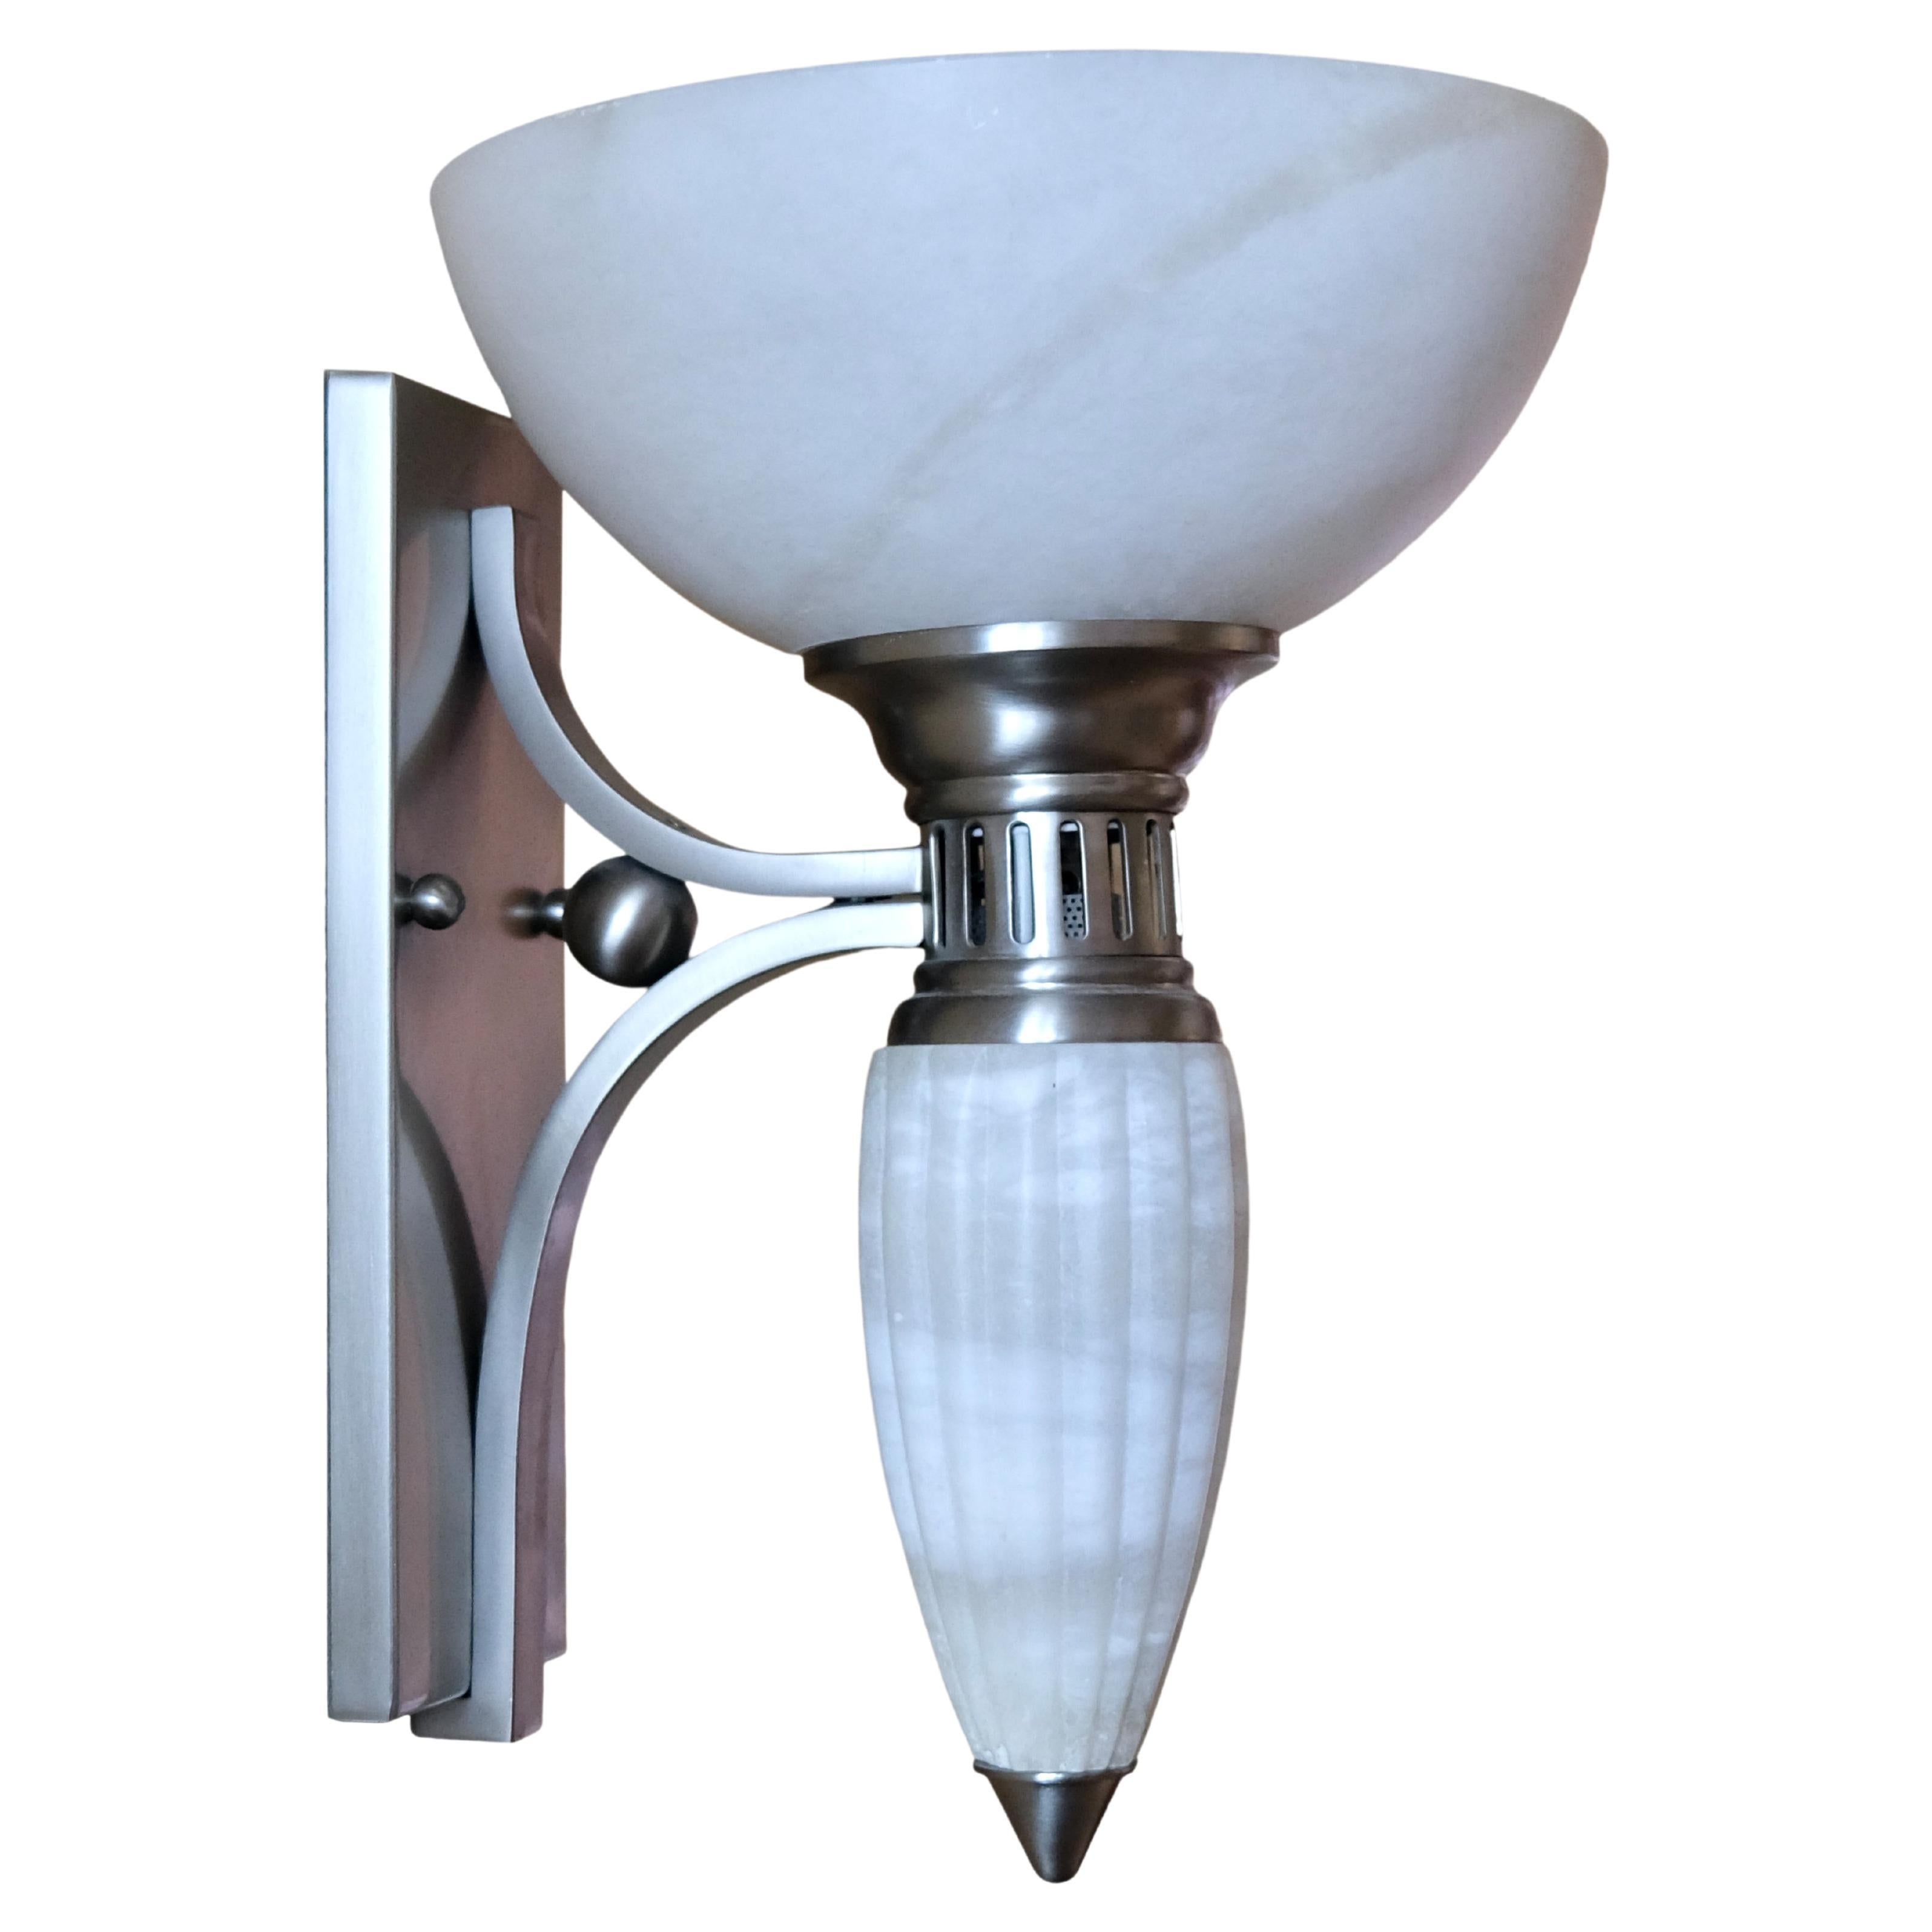 Set of 2 Art Deco Style Wall Sconces with Alabaster Bowls and Illuminated Cones For Sale